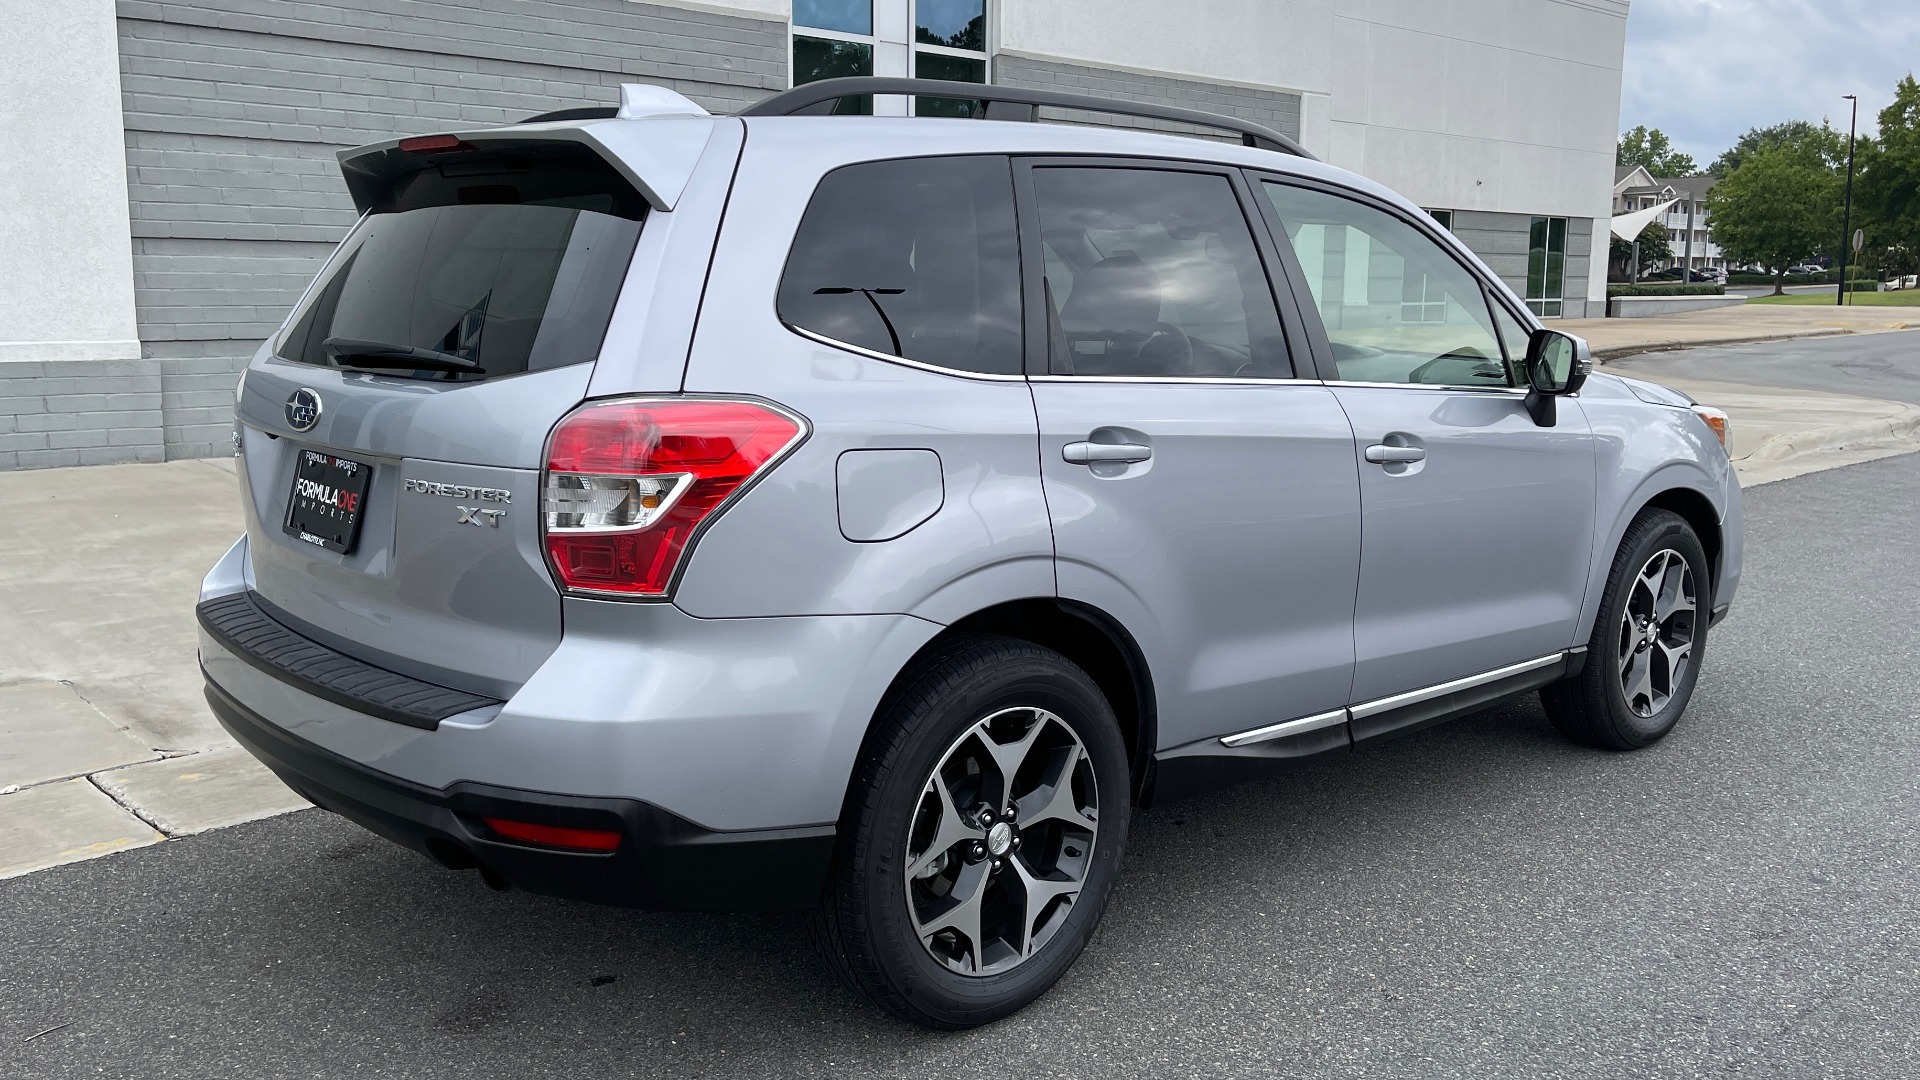 Used 2016 Subaru FORESTER 2.0XT TOURING / NAV / SUNROOF / ADAPT CRS / PRE-COLLISION / REARVIEW for sale Sold at Formula Imports in Charlotte NC 28227 2